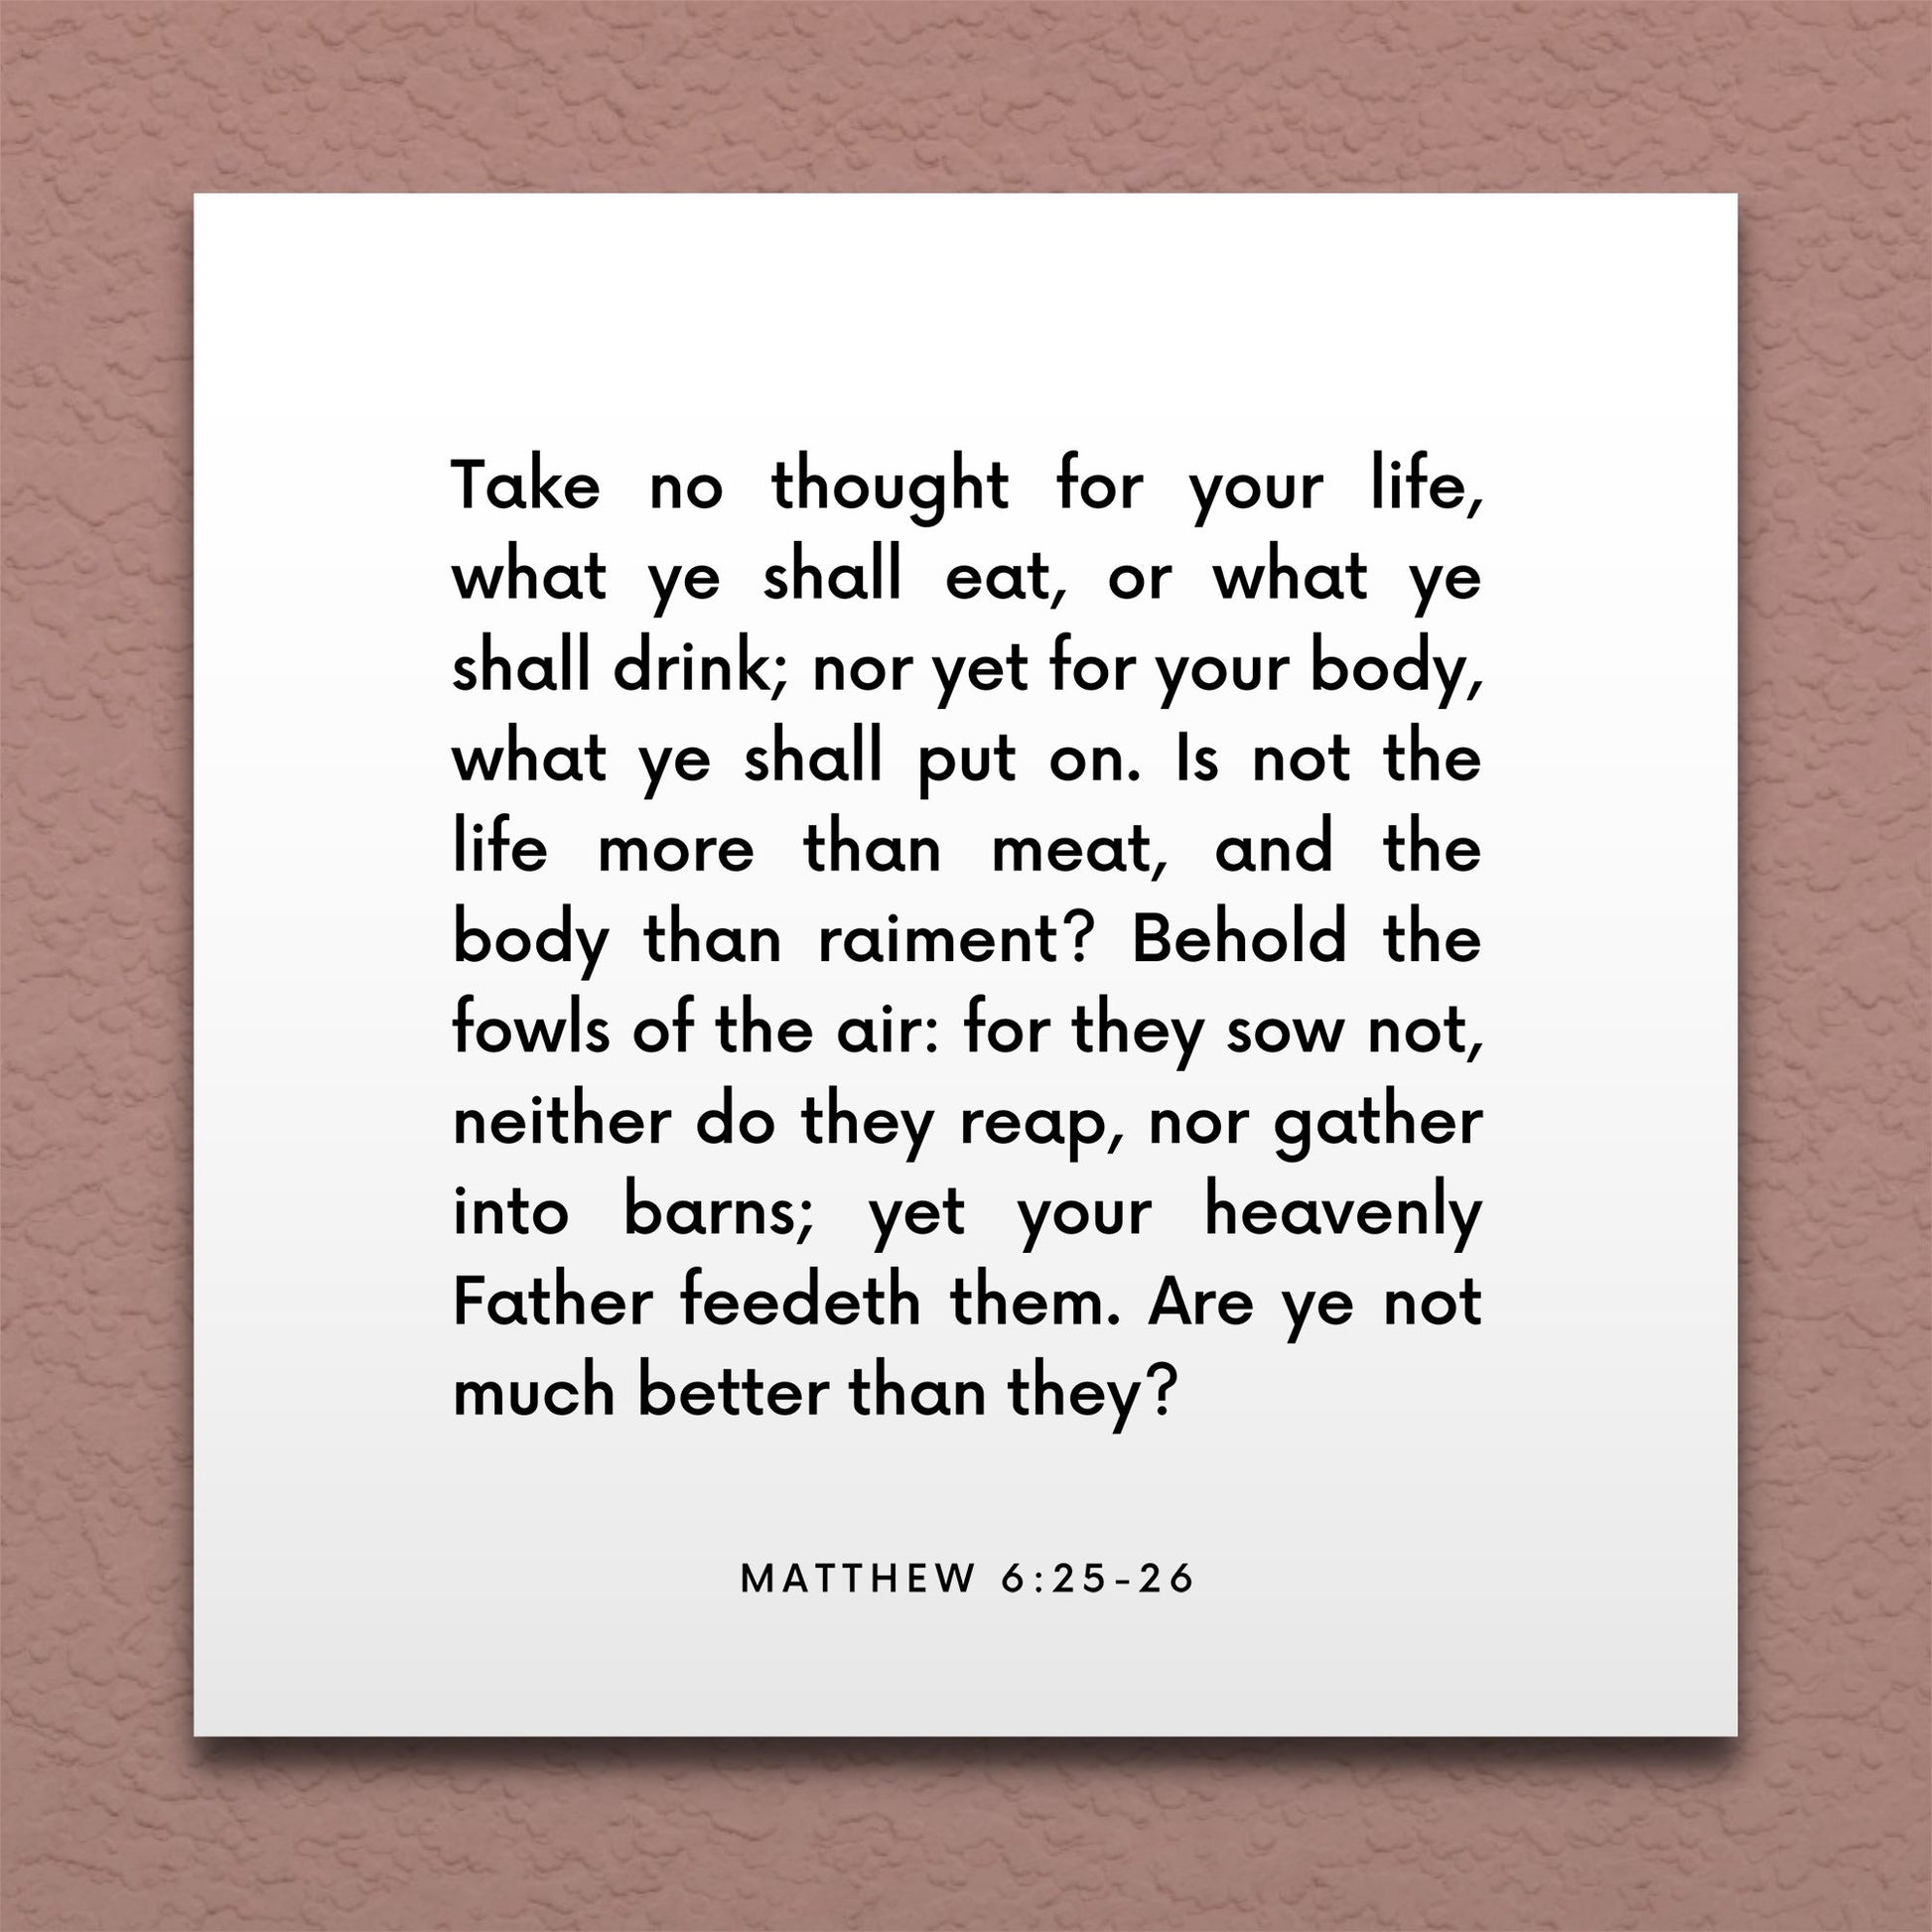 Wall-mounted scripture tile for Matthew 6:25-26 - "Take no thought for your life, what ye shall eat"